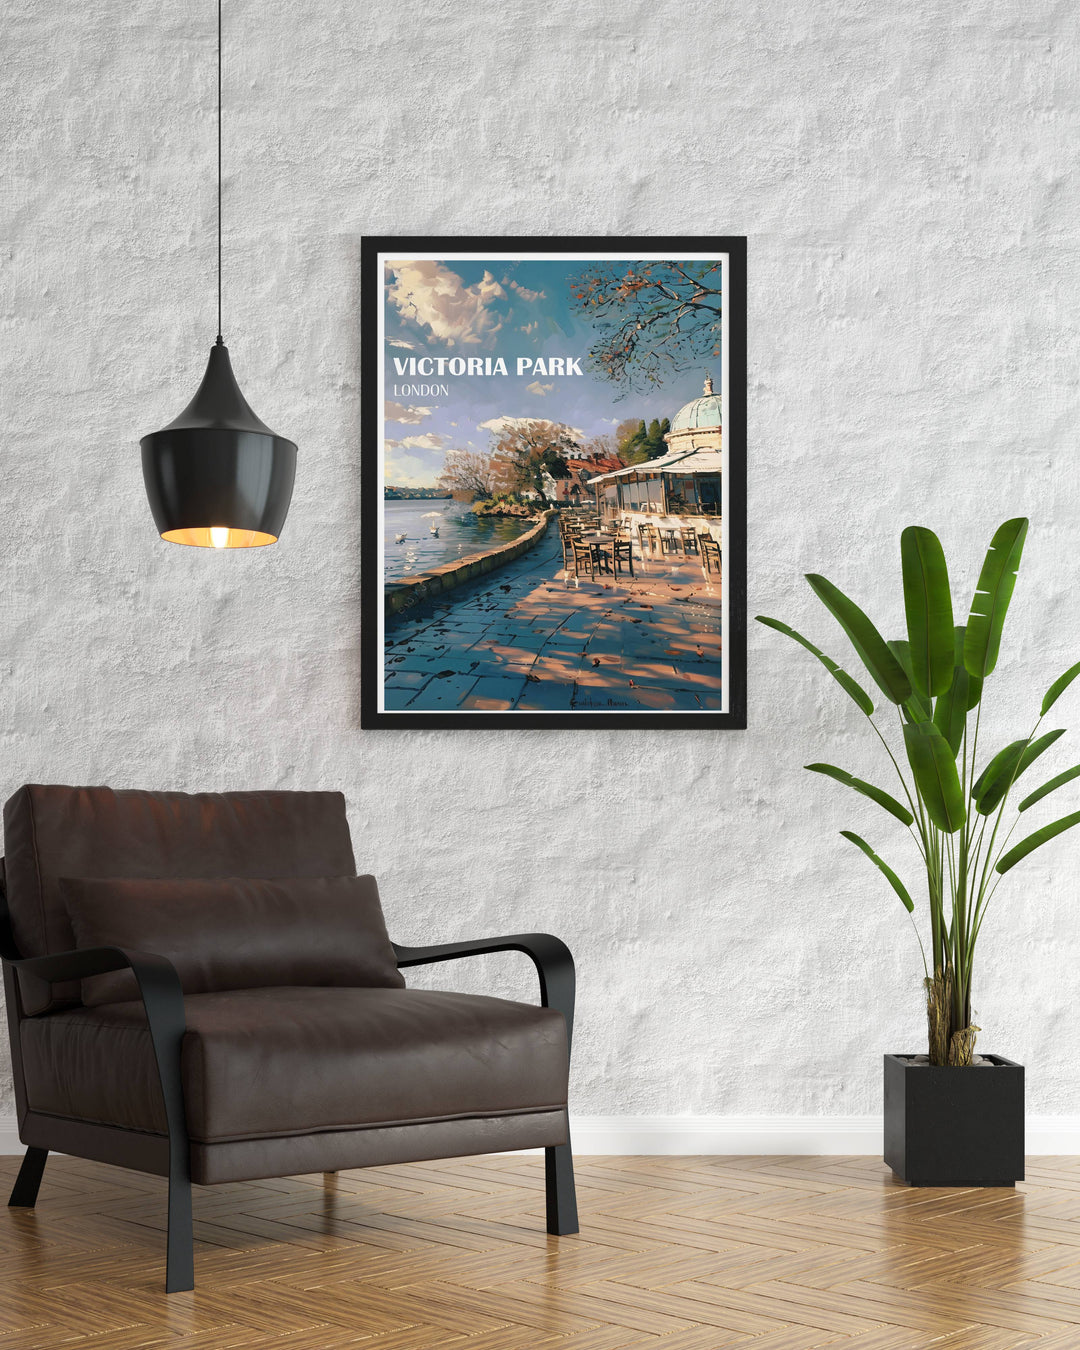 Scenic poster of The Pavillion Café in Victoria Park, capturing the picturesque landscapes and serene ambiance of East Londons cherished park.